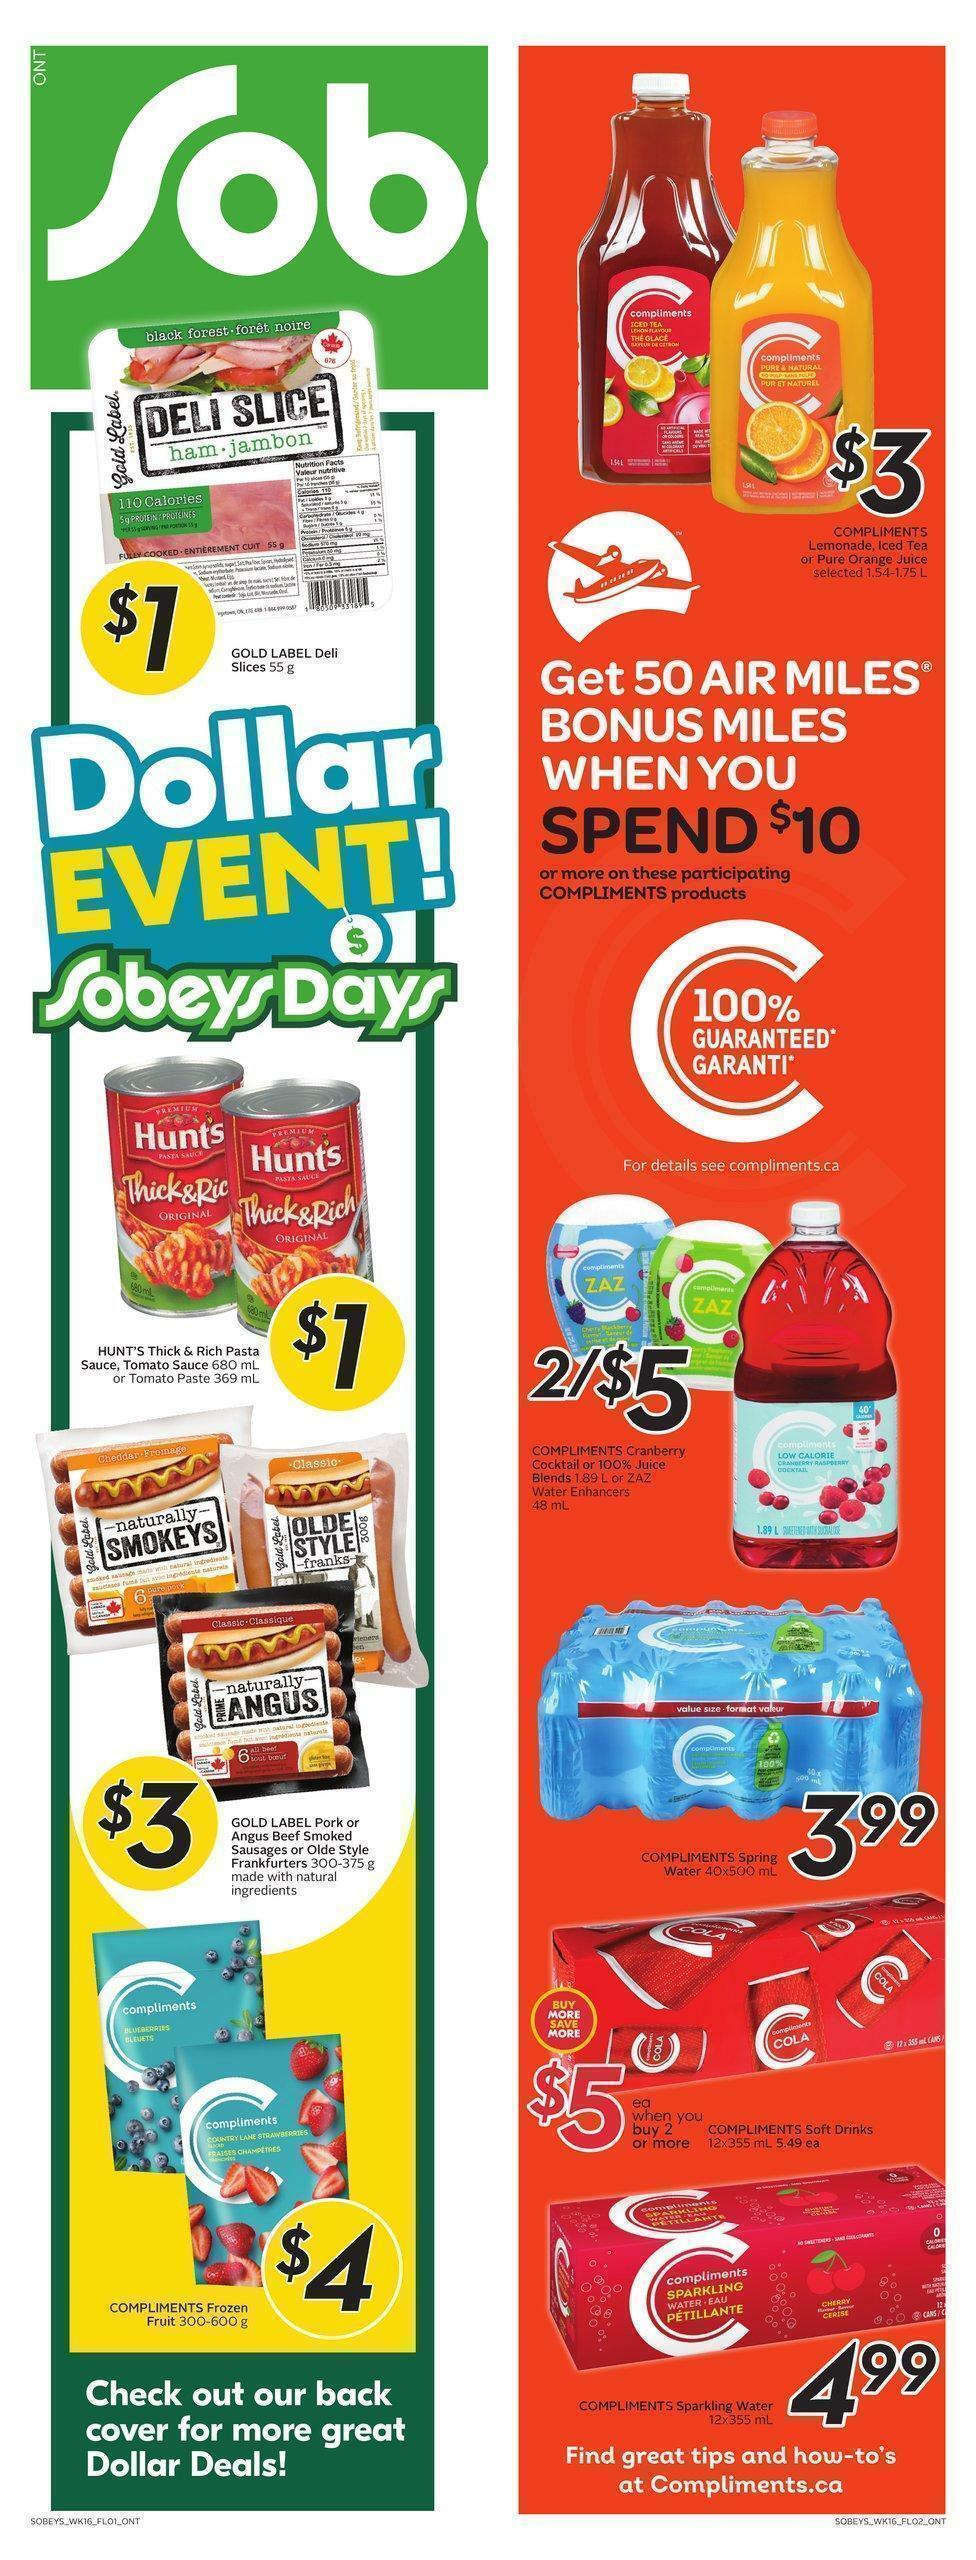 Sobeys Flyer from August 18